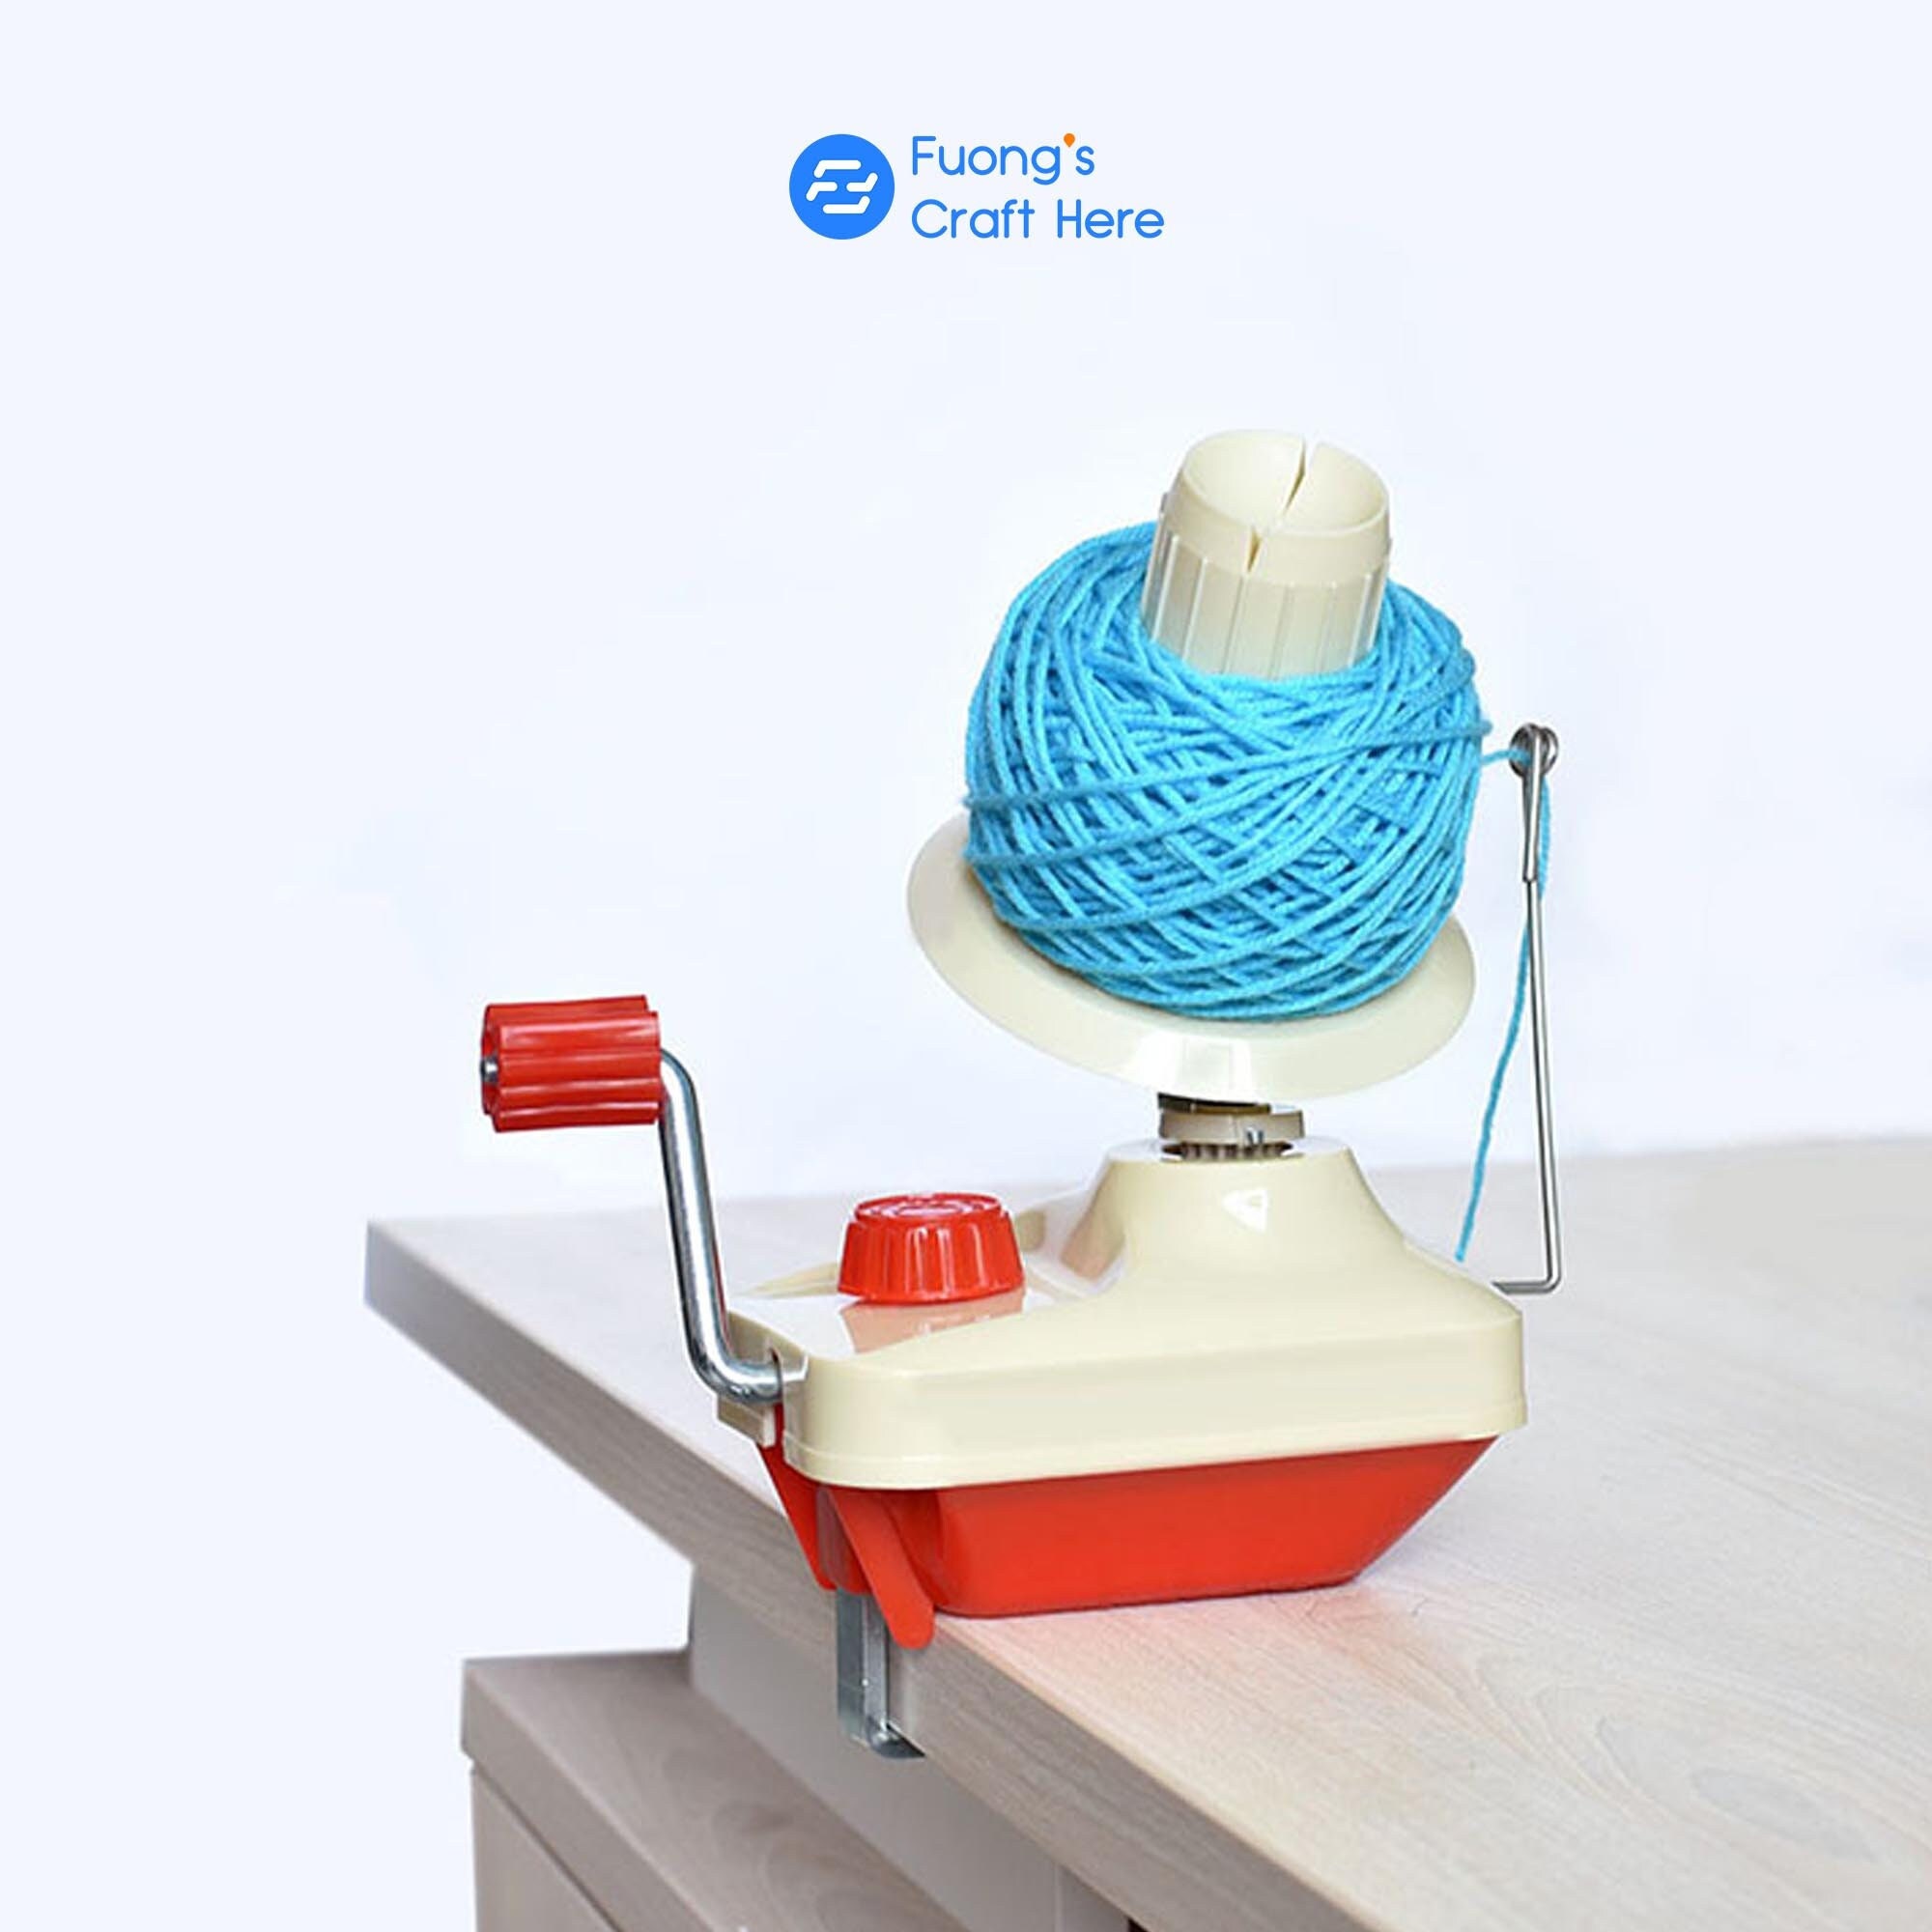 Yarn Winder For Crocheting Quiet Wool Yard Ball Wining Machine Home  Knitting Essentials For Scarves Sweaters Crochet Toys Mitten - AliExpress